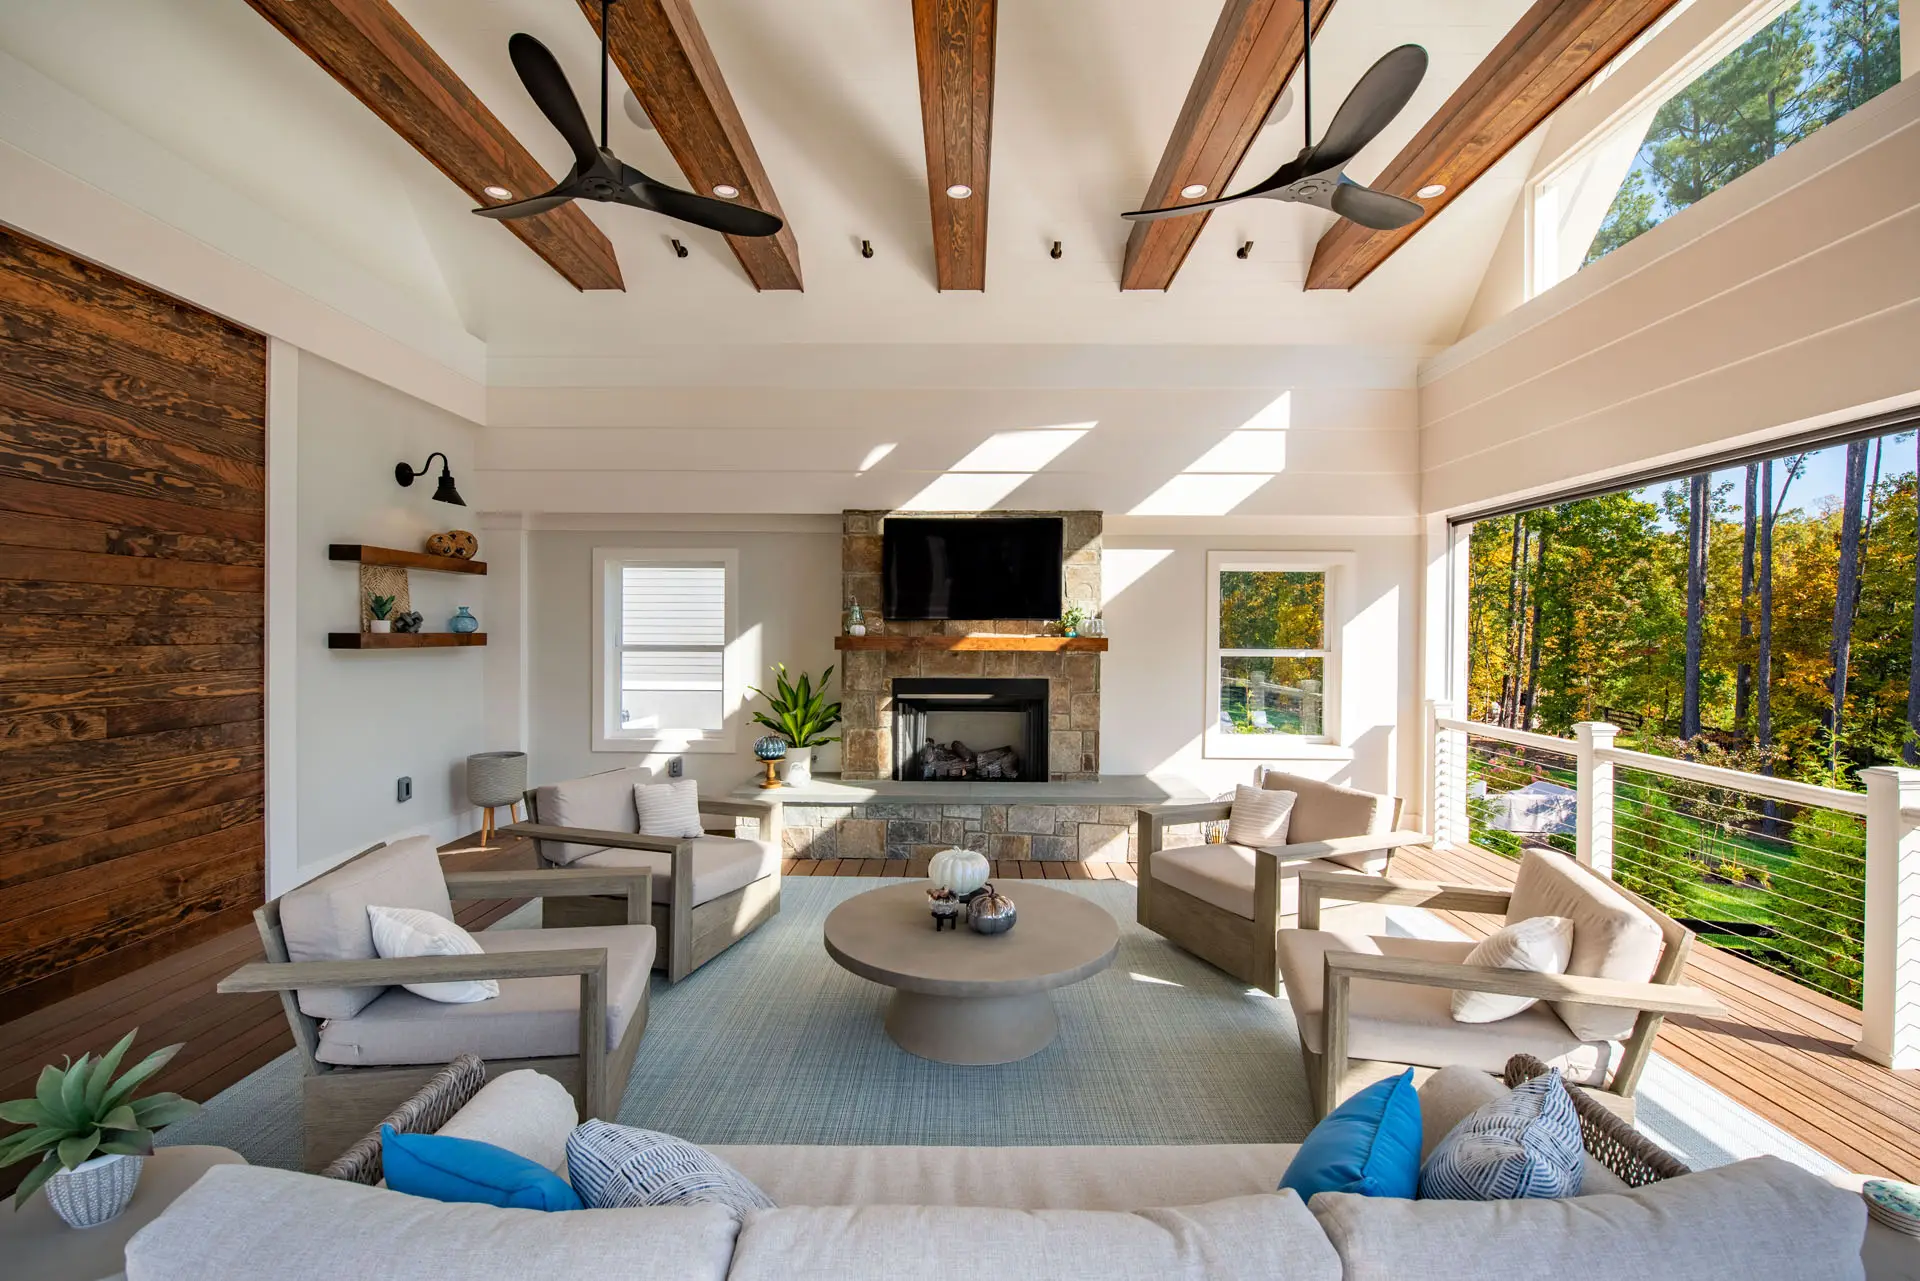 vaulted ceilings and fans